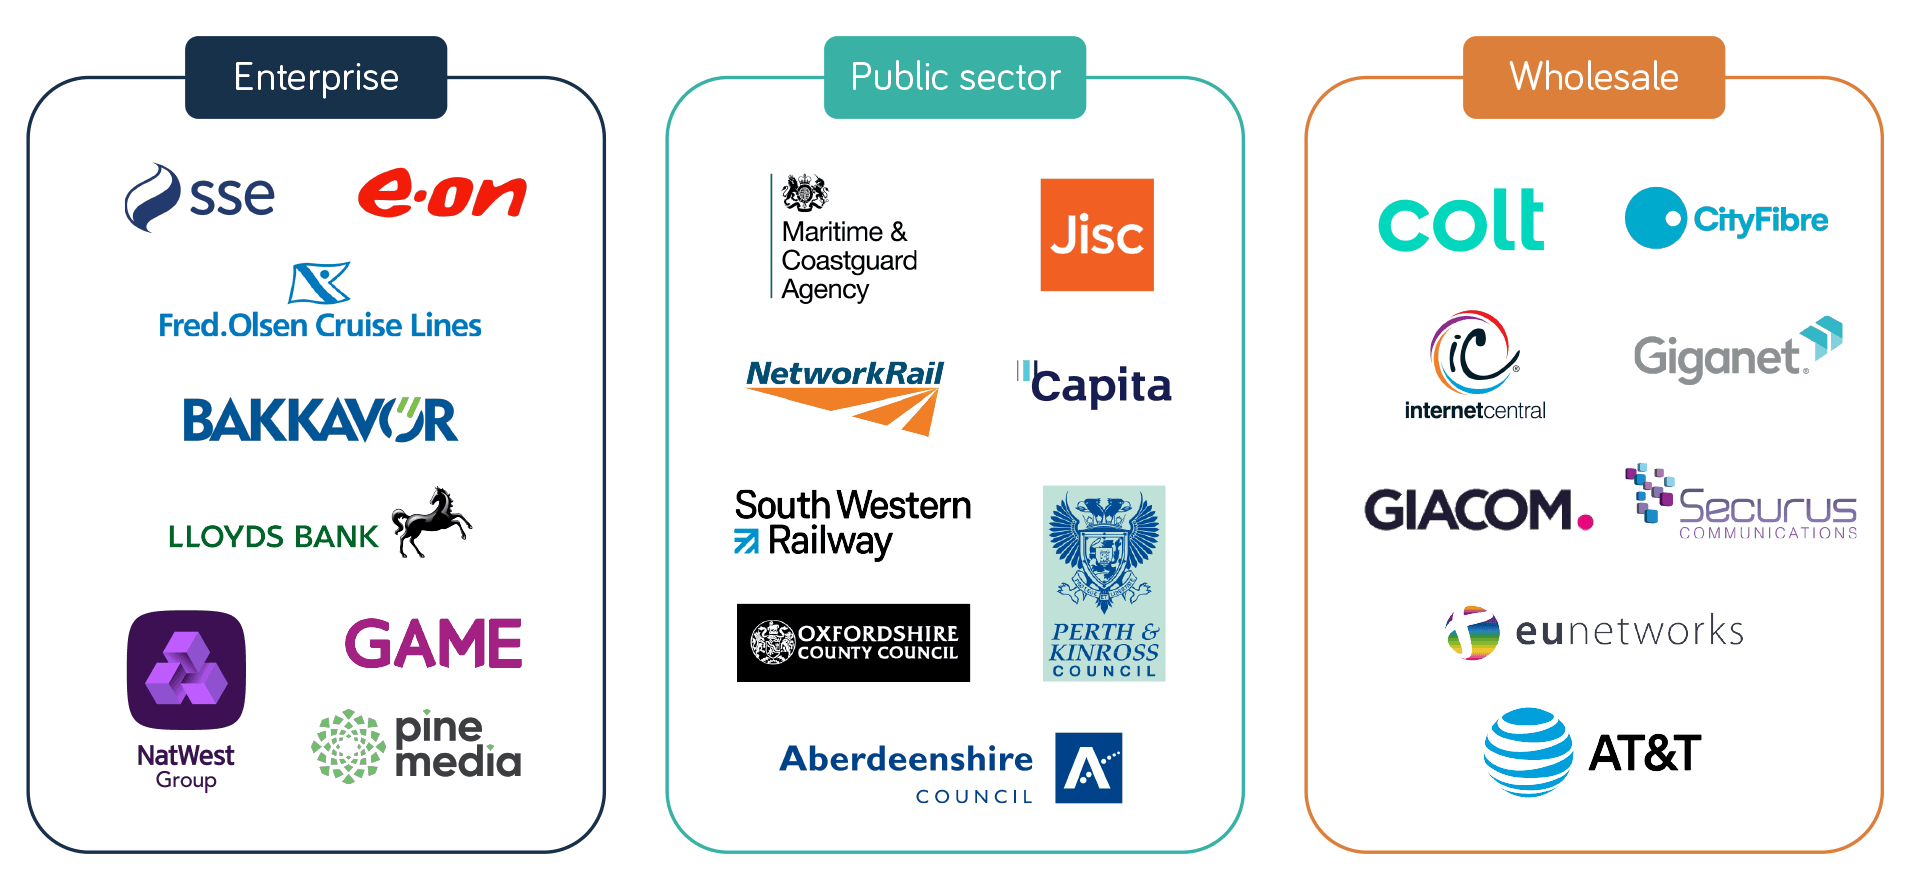 Logos of our customer partners in the enterprise, public sector and wholesale sectors